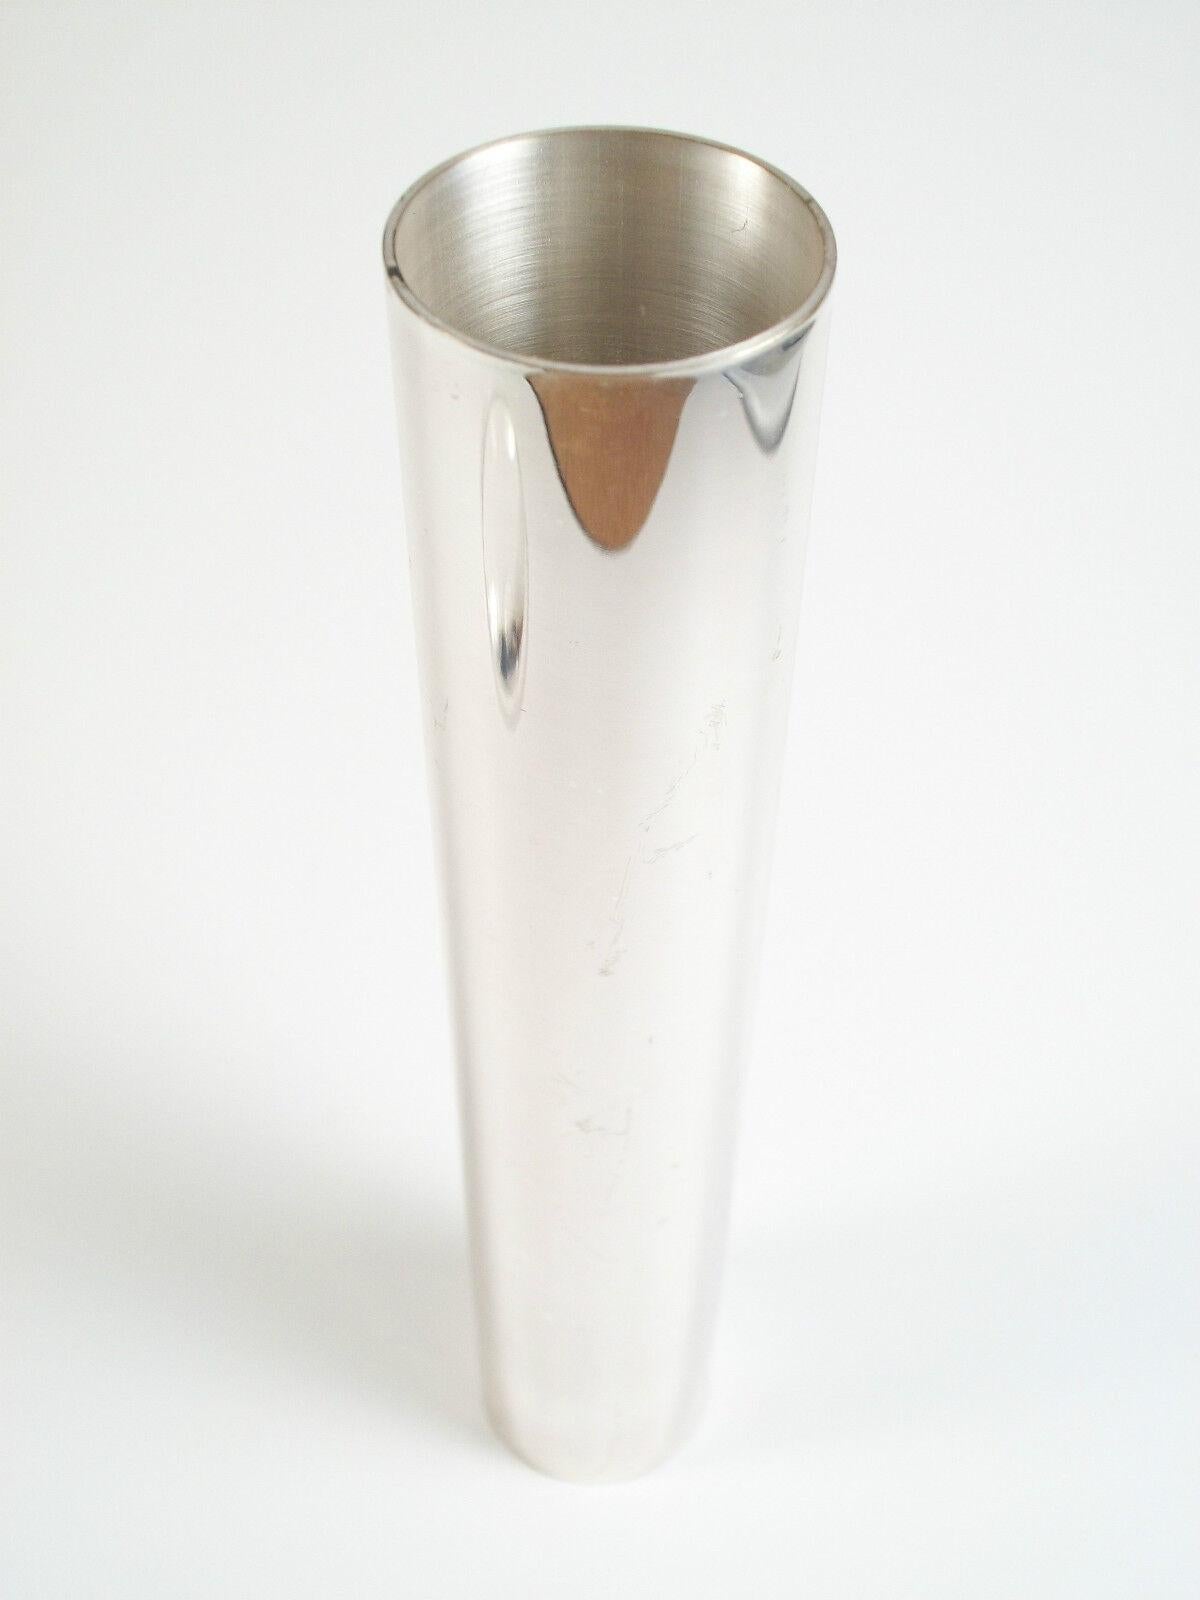 20th Century WMF - Mid Century Modern Silverplate Bud Vase - Germany - Circa 1970's For Sale